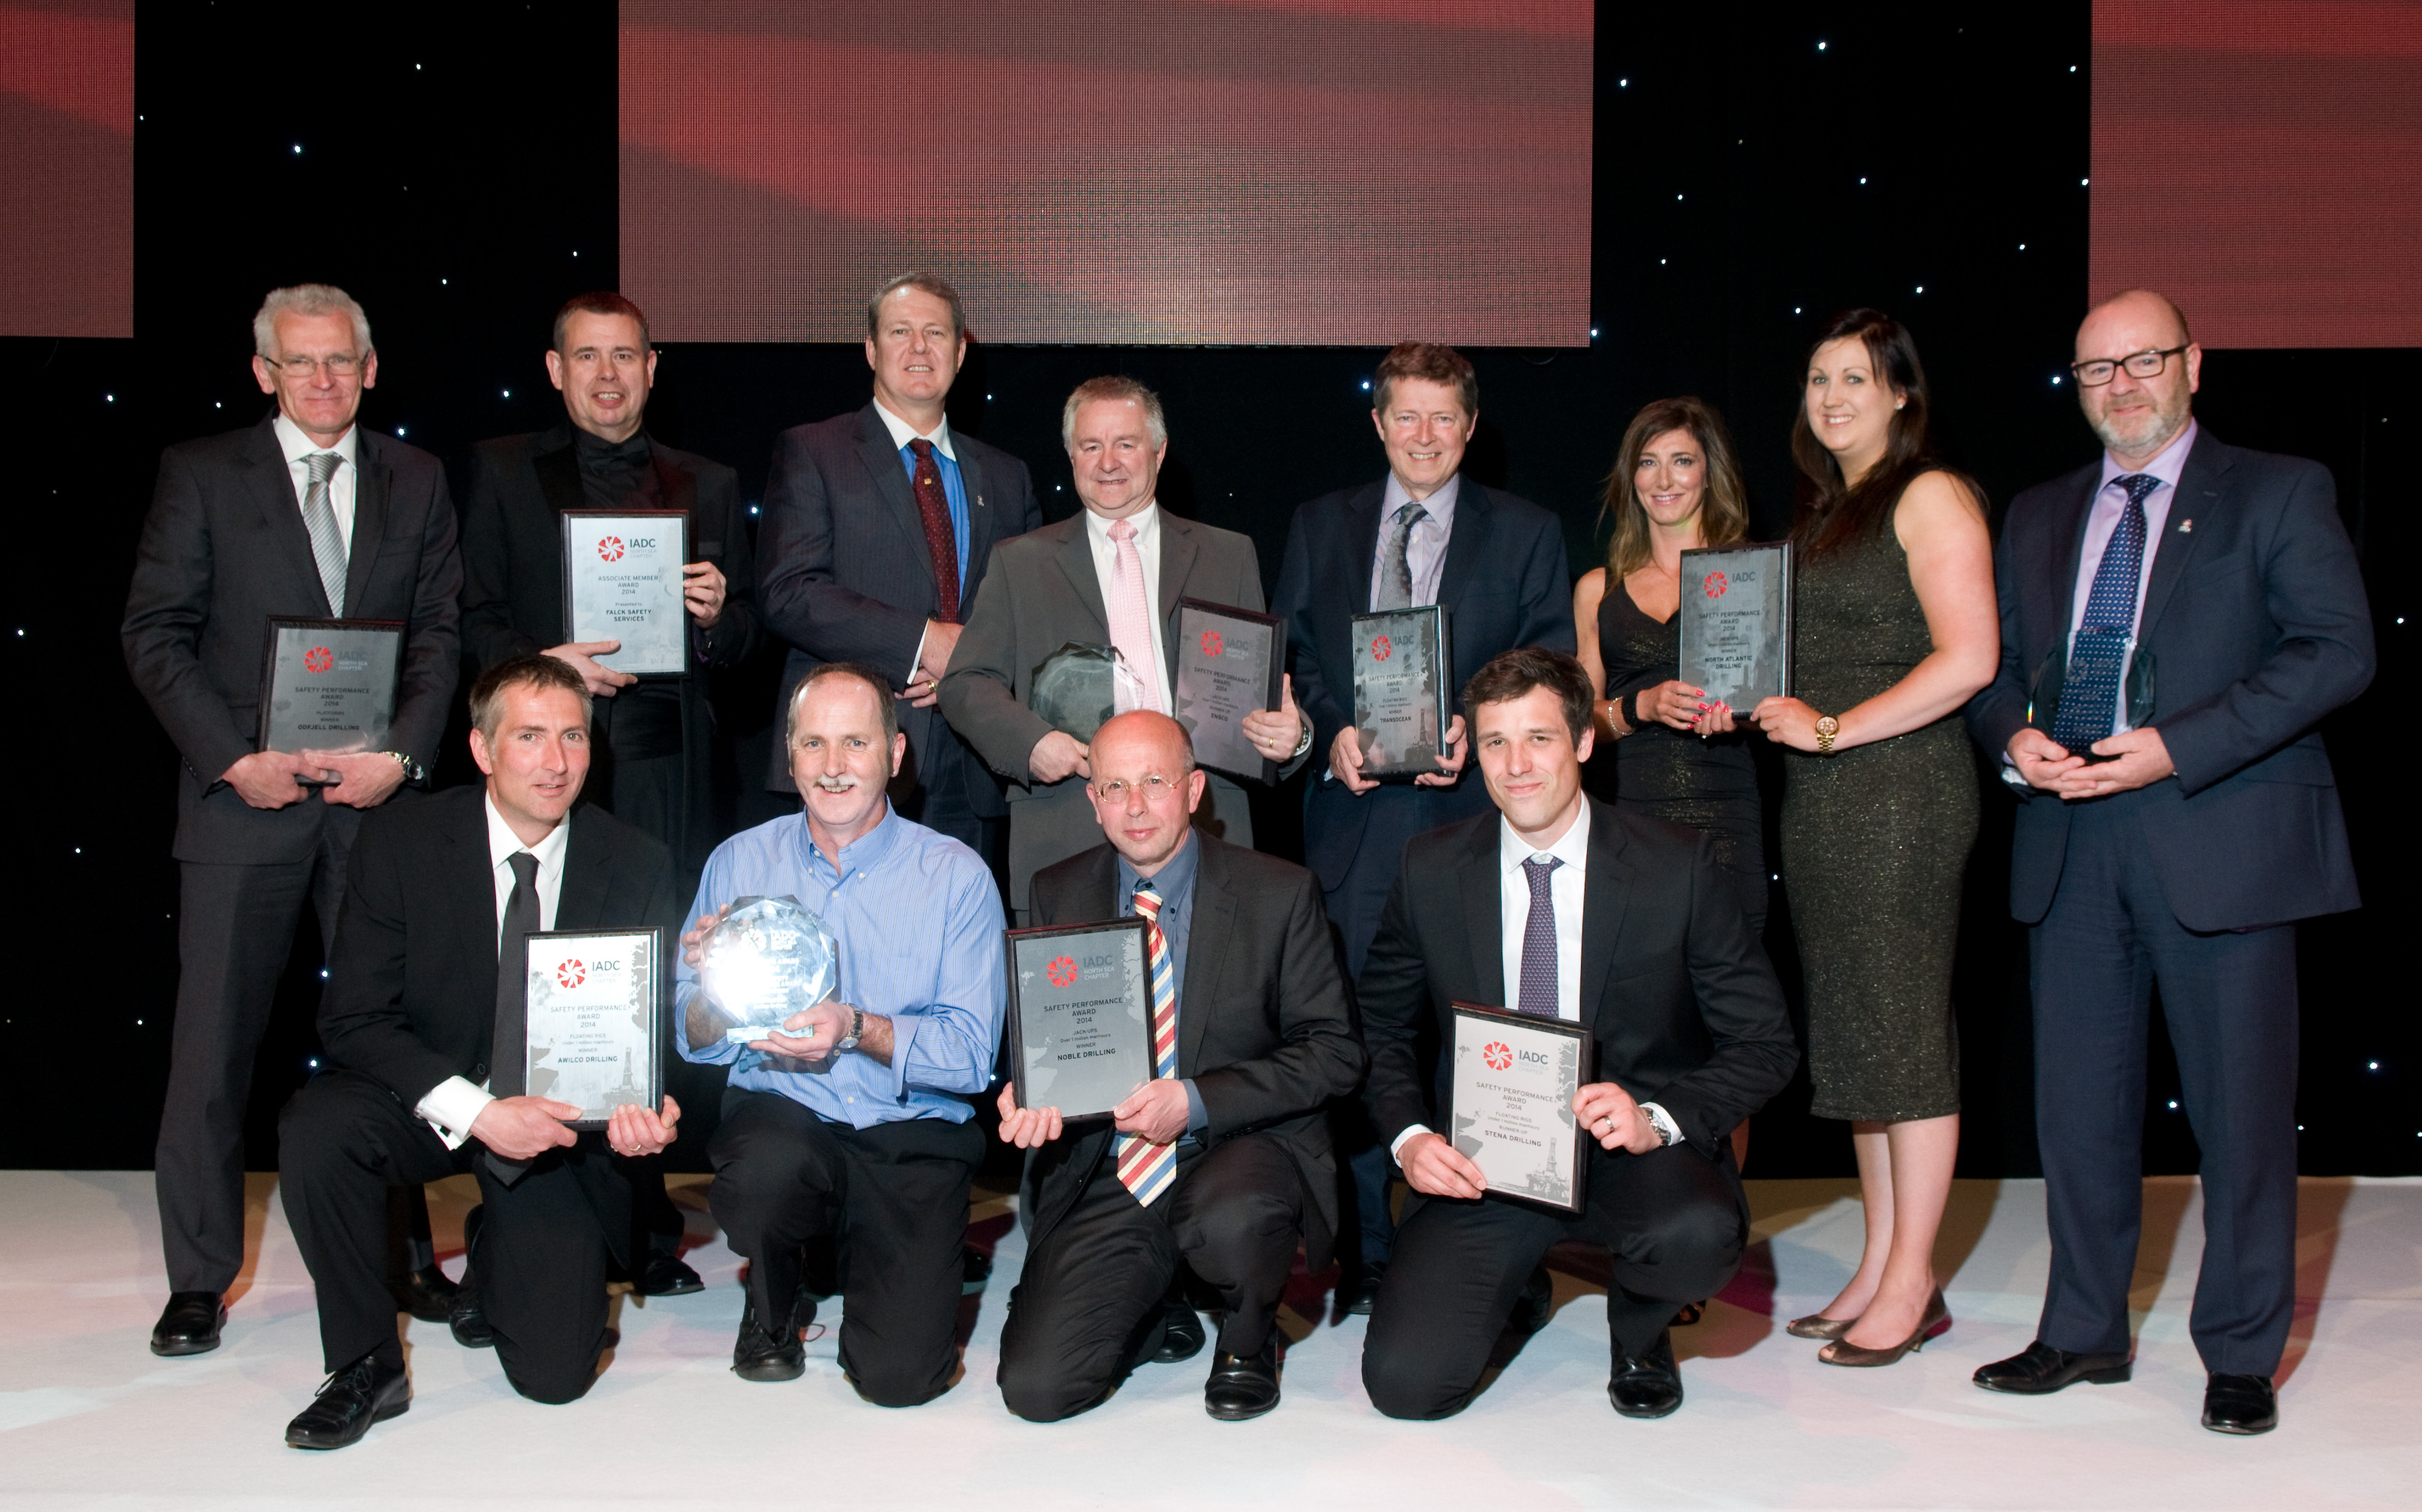 IADC safety awards winners and runners-up 2015, Left to right: BACK ROW: Eddie Fowler, Odfjell Drilling; Neil Burr, Falck Safety Services; Lee Reborse, Noble Drilling; Eric Holmes, Ensco; Adrian Blake, Transocean; Nicola Riddel and Eilidh Shaw, North Atlantic Drilling; Jim Paterson, KCA Deutag. FRONT ROW: Mike Brumfield, Awilco Drilling; Pete Thomson, on behalf of Awilco Drilling; Hans Krielen, Noble Drilling; Tony Rhodes, Stena Drilling